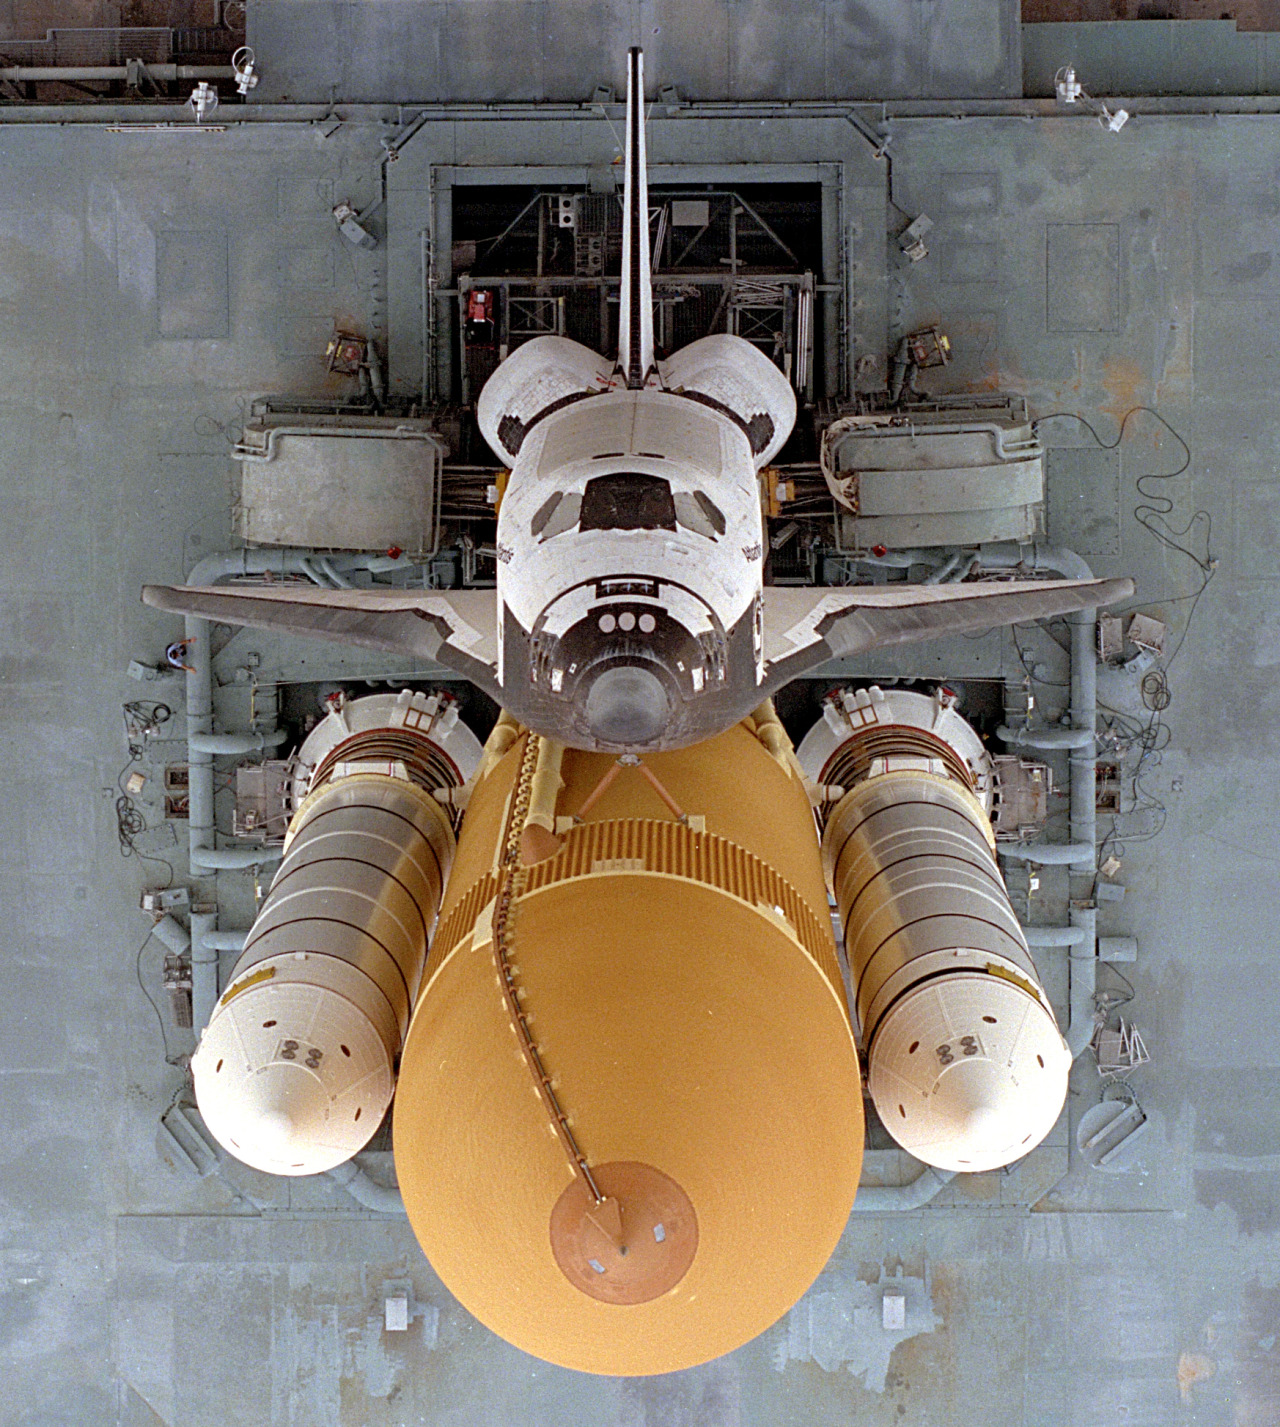 Overhead view of Space Shuttle Atlantis on the Mobile Launcher Platform as it traveled to Launch Pad 39A from the Vehicle Assembly Building. Atlantis lifted off on Mission STS-79 on September 16, 1996.